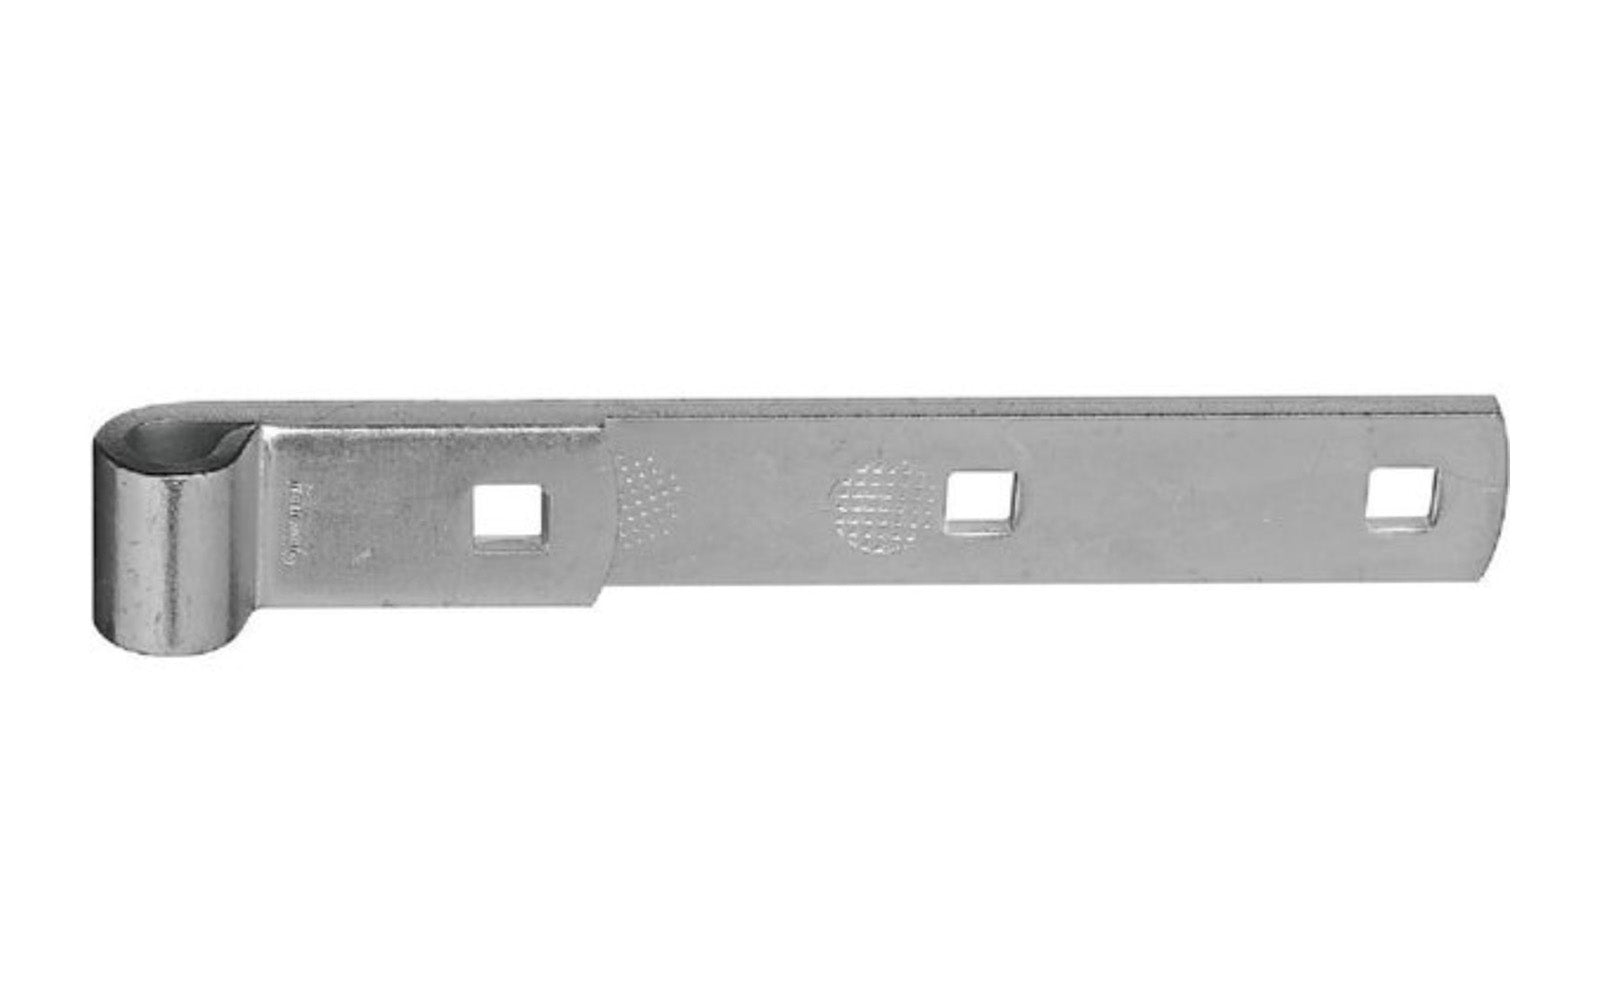 These zinc-plated hinge straps are designed to use with screw hooks for gates. Zinc-plated to resist corrosion. Made of hot-rolled steel. Coated with "WeatherGuard" protection to withstand harsh weather conditions & prevent corrosion. 8" Size